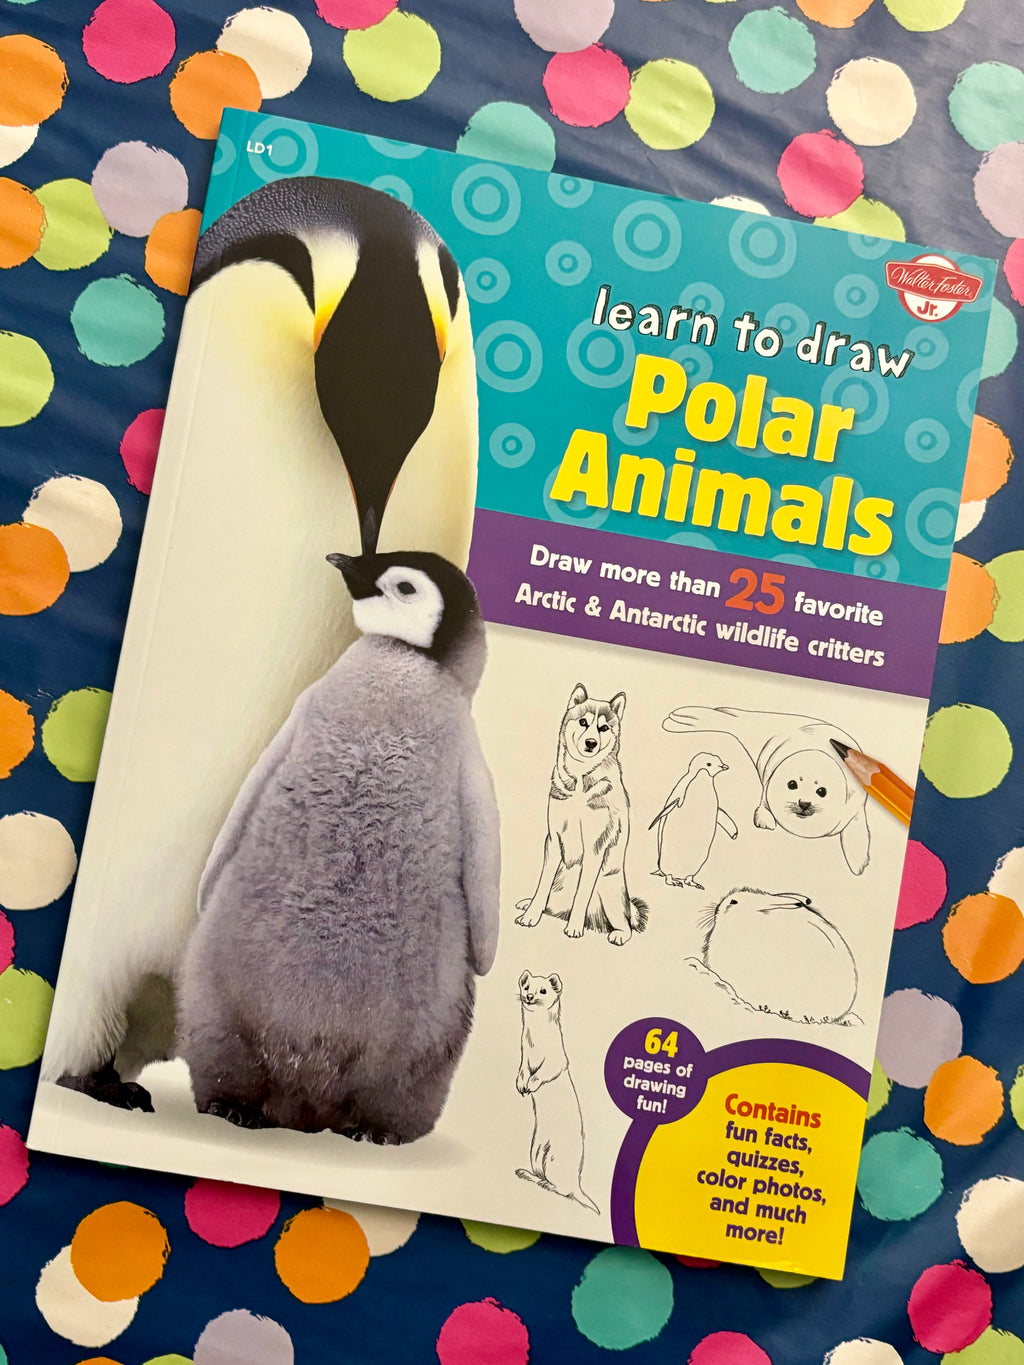 Learn to Draw Polar Animals: Draw more than 25 favorite Arctic & Antarctic wildlife critters- By Walter Foster Jr.